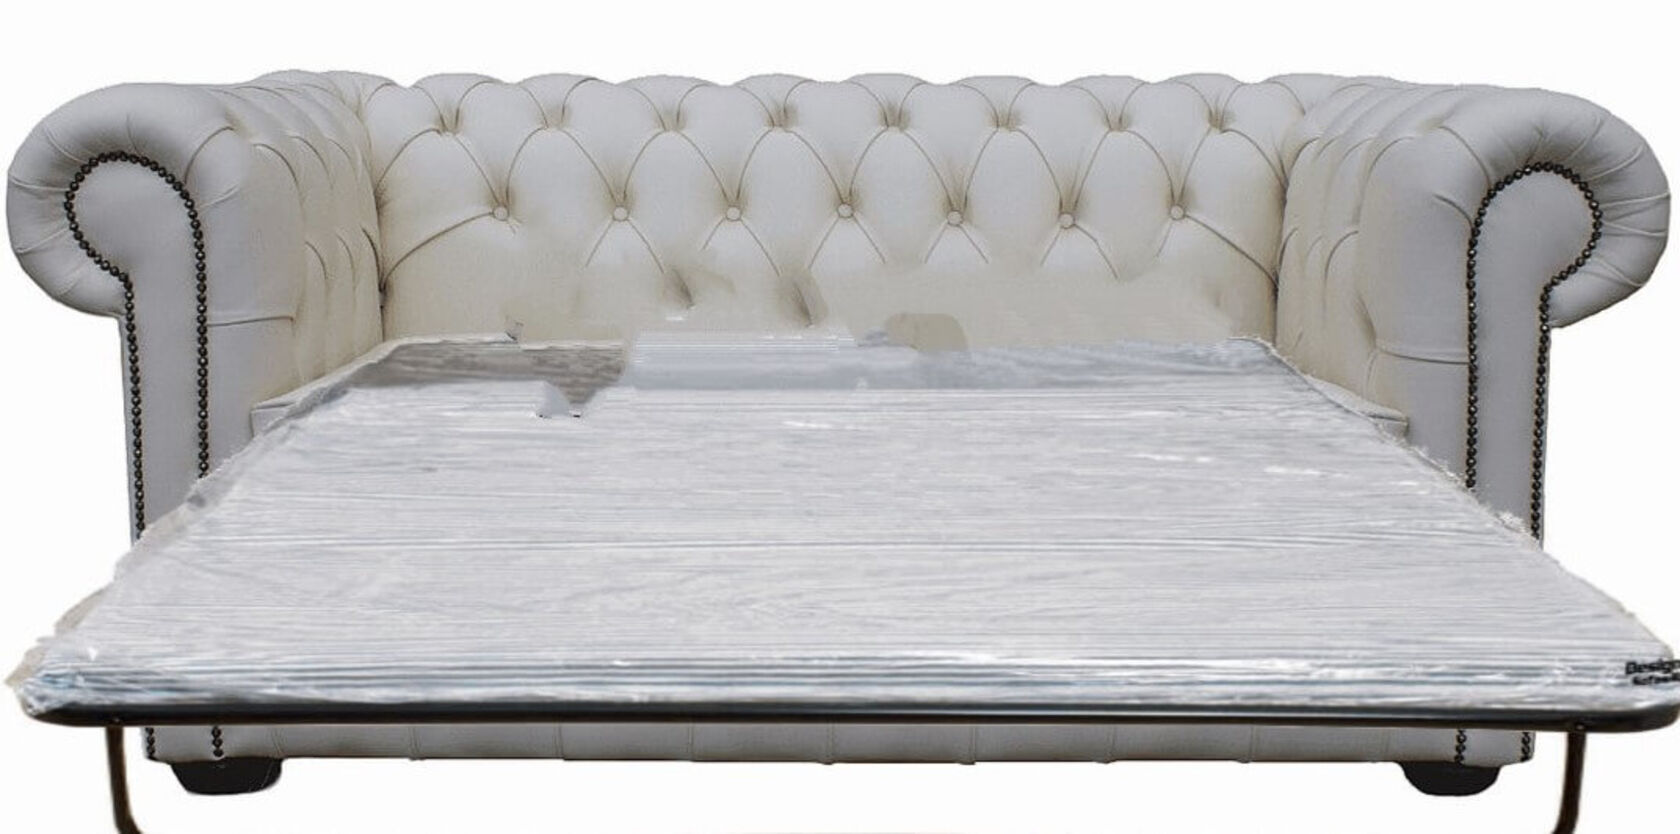 2 Seater White Leather Chesterfield, White Leather Sofa Bed Couch